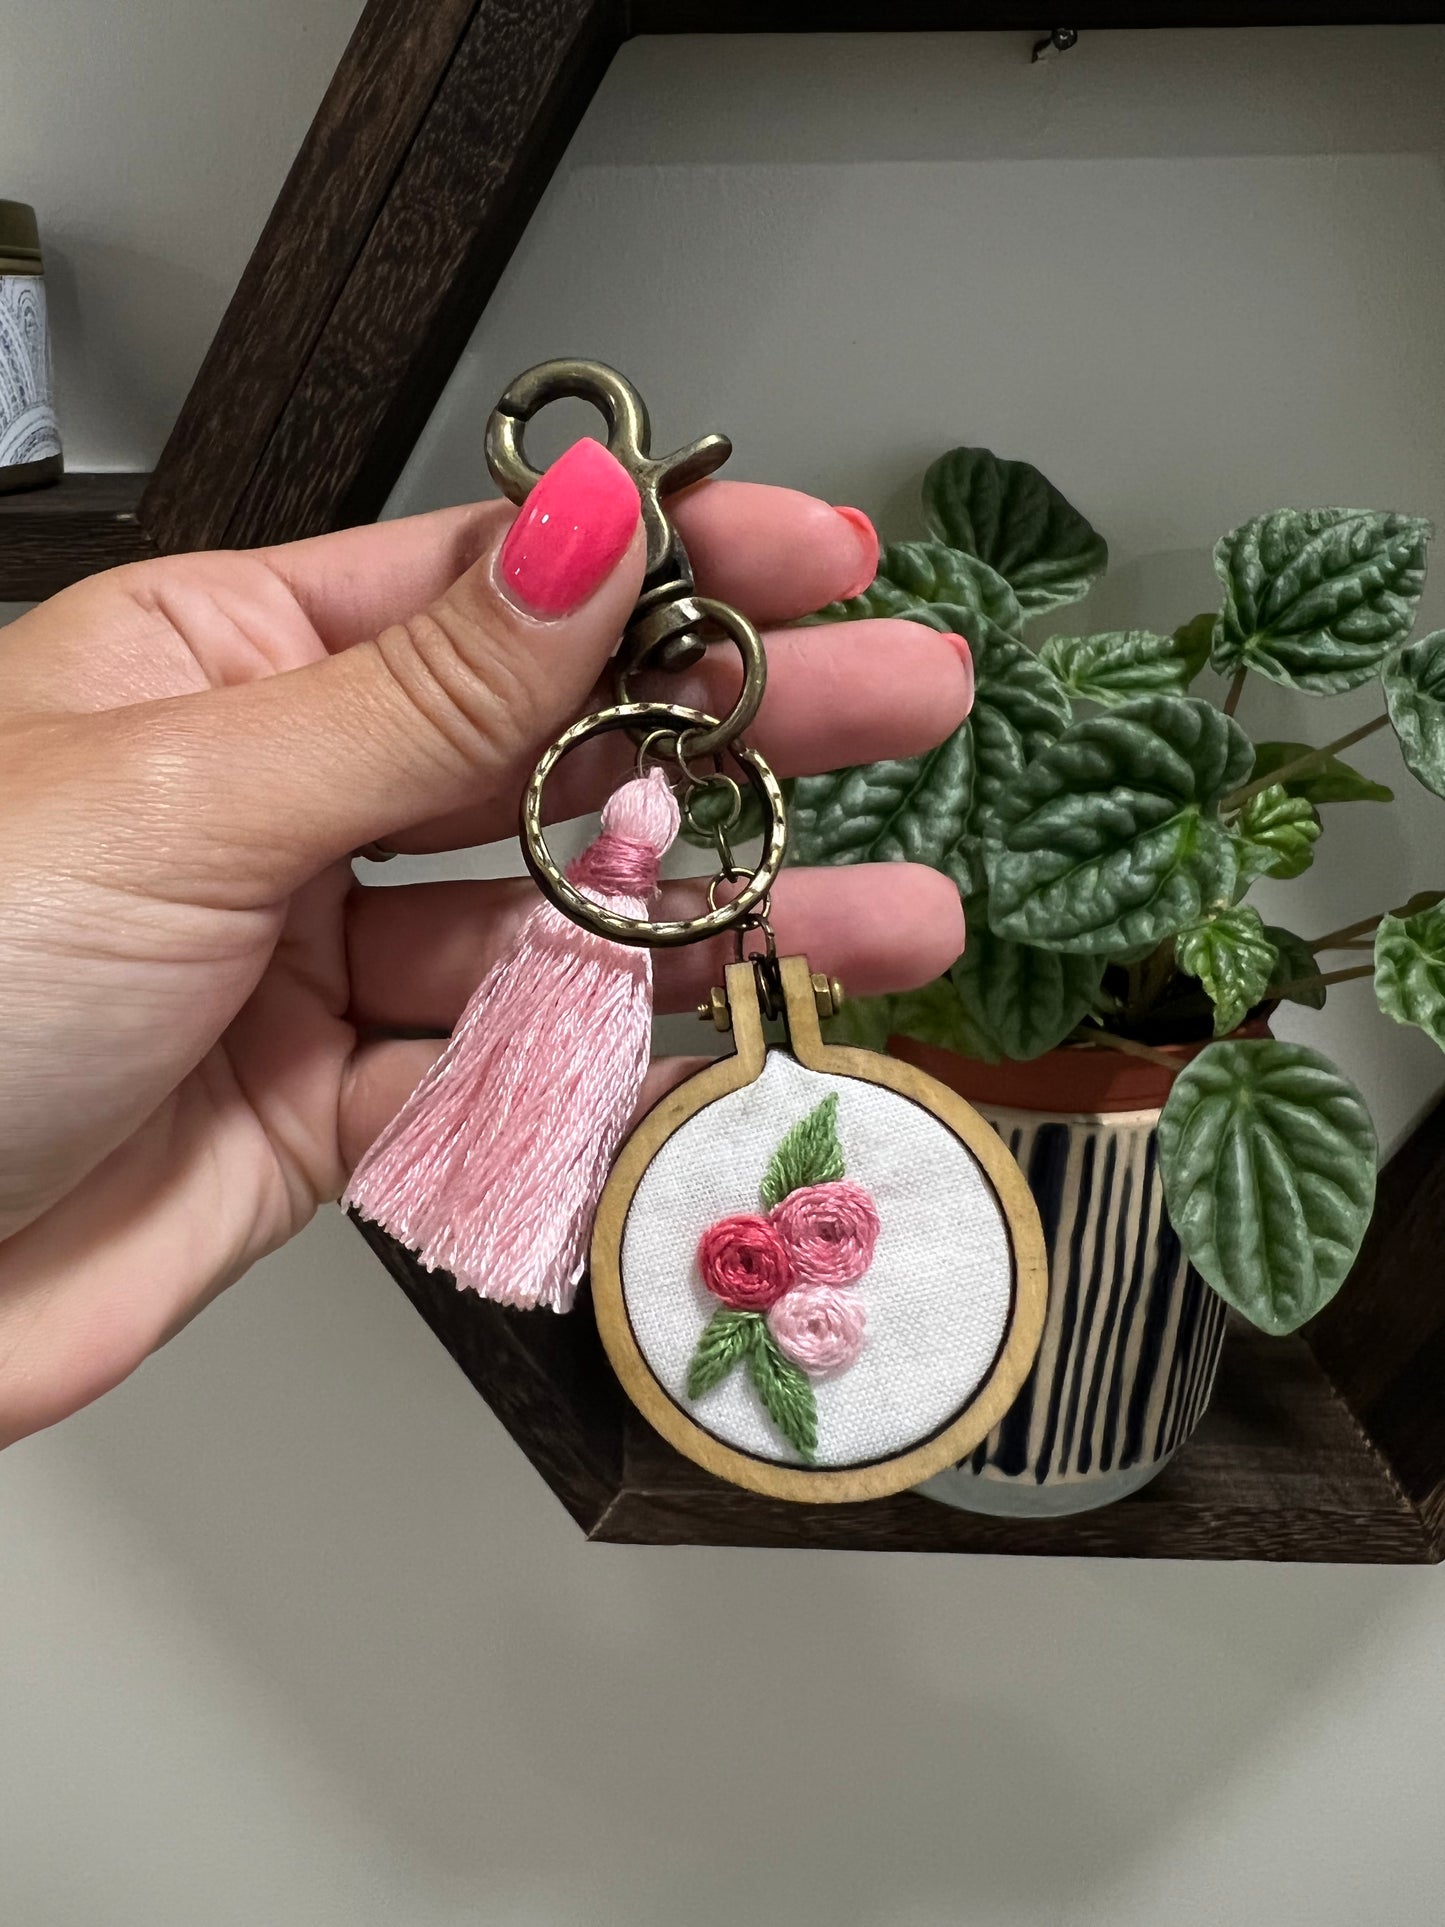 Hand embroidered keychain with pink flowers